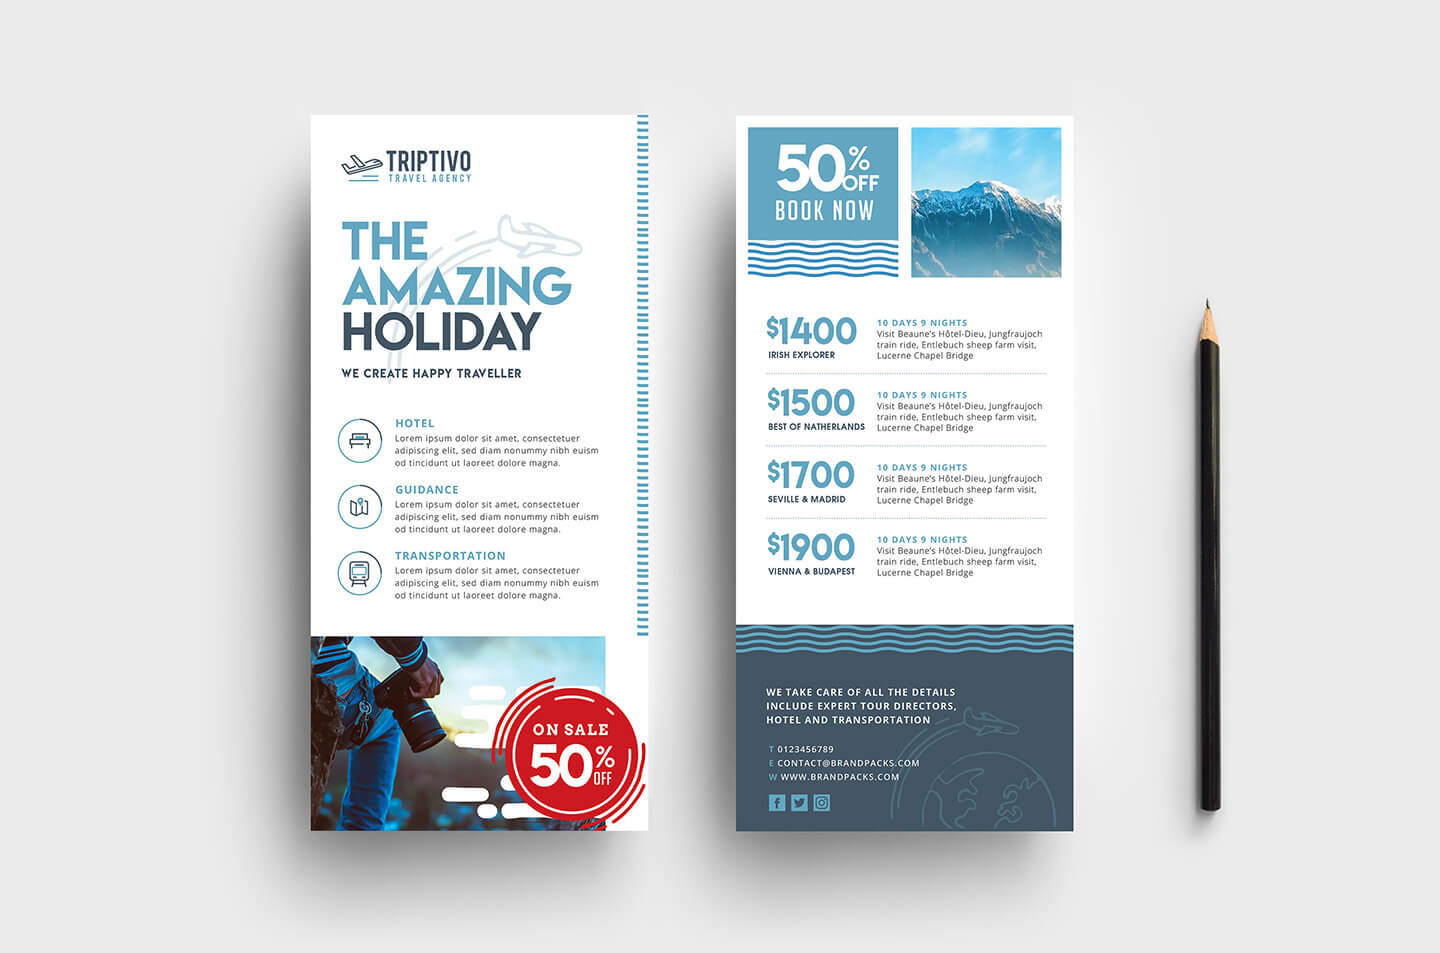 Travel Company Dl Card Template In Psd, Ai & Vector – Brandpacks Inside Dl Card Template